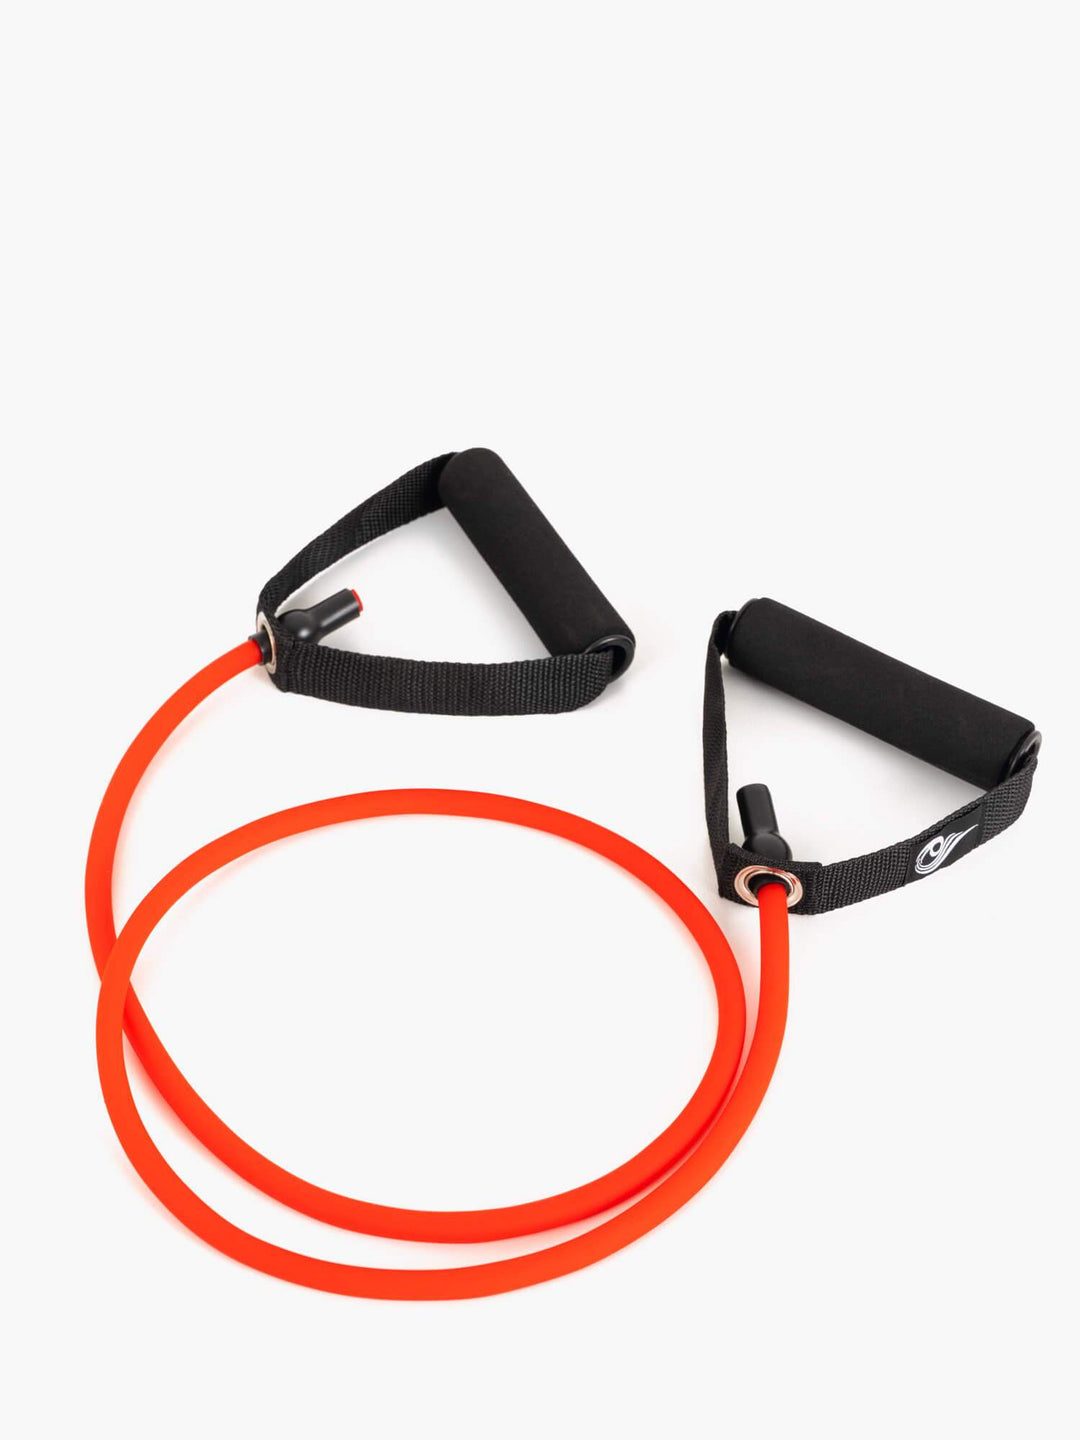 Tube Resistance Bands, REP Fitness